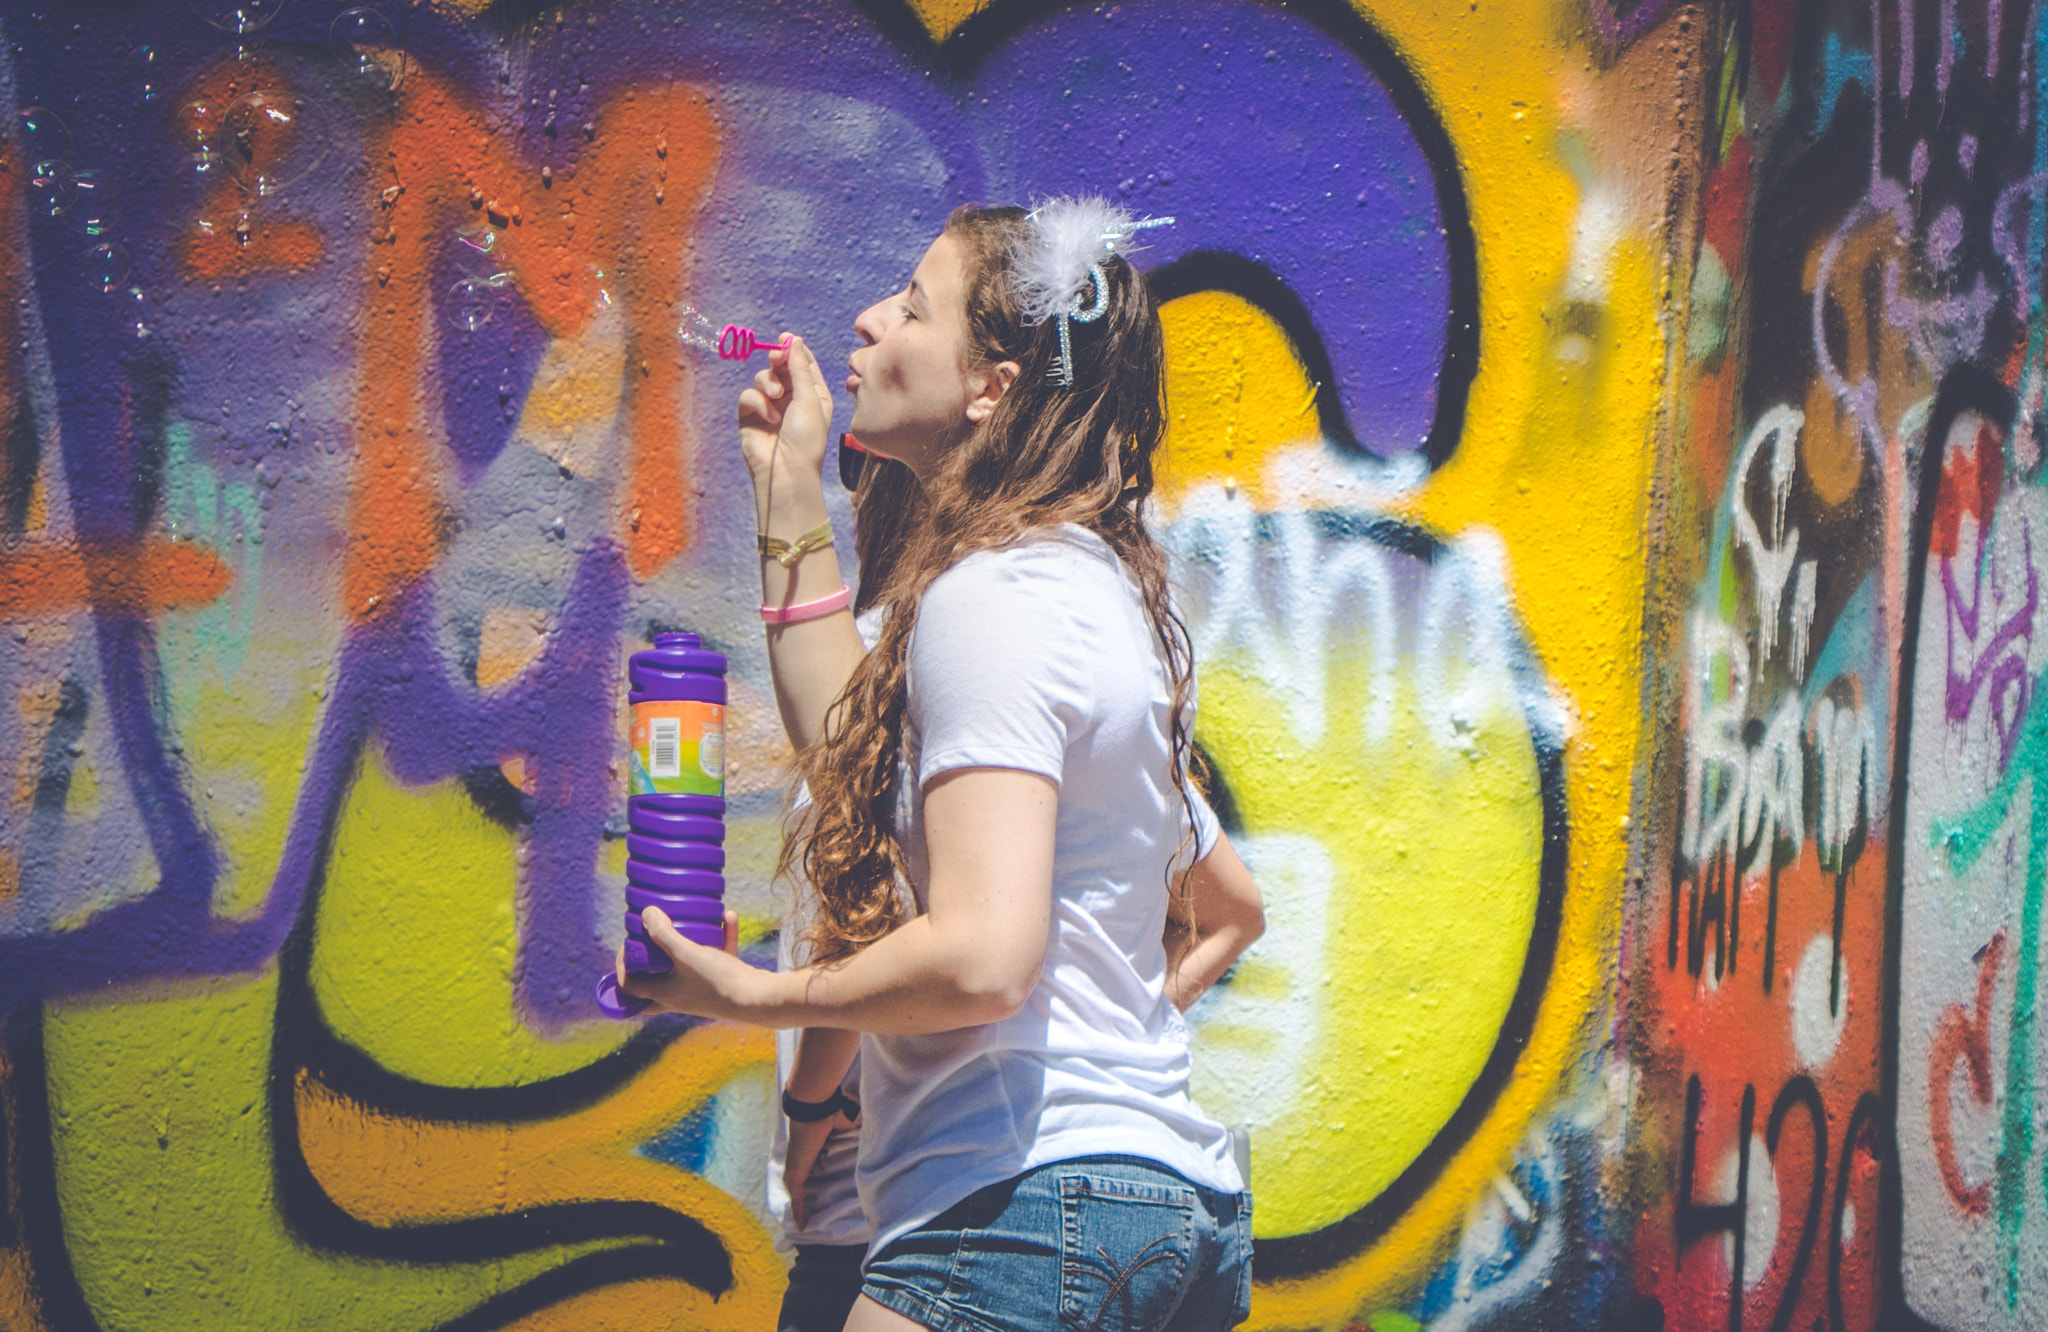 Sony ILCA-77M2 sample photo. Girl blowing bubbles at graffiti park photography